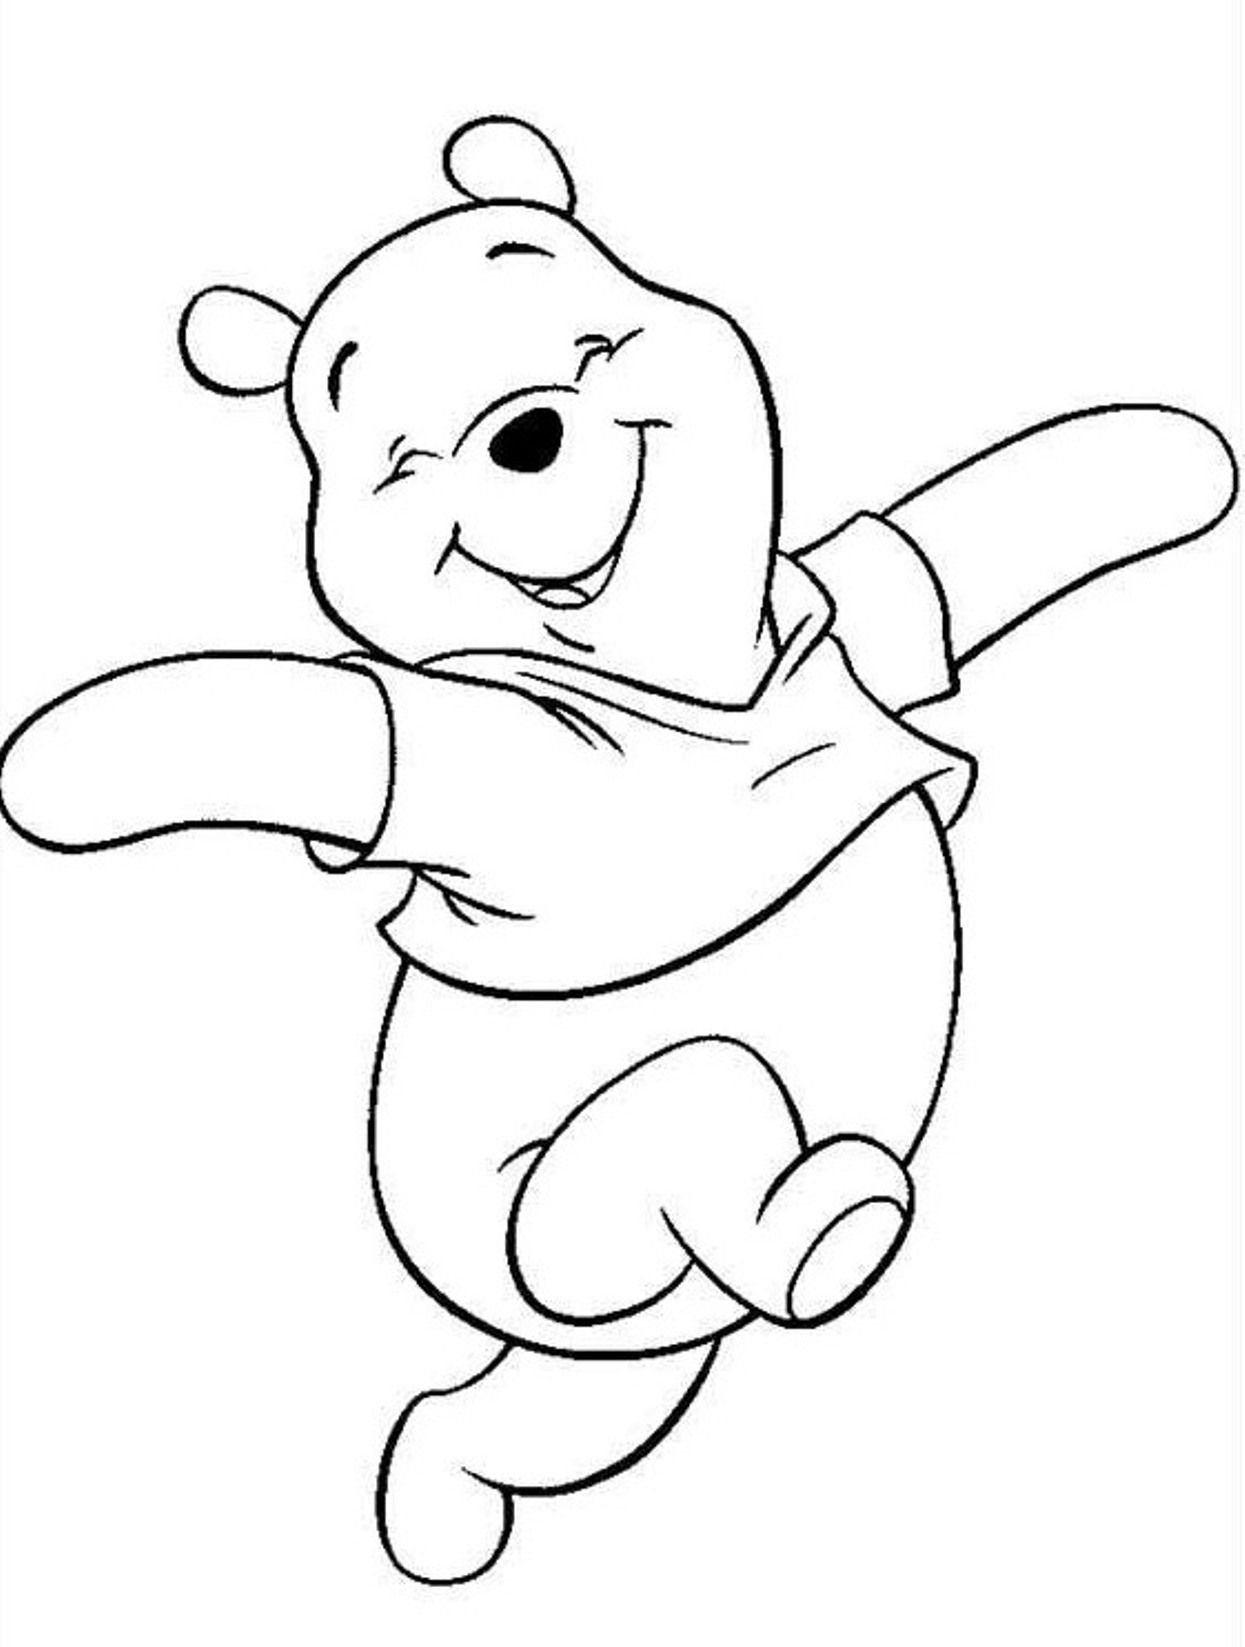 Happy Winnie The Pooh Sd388 Coloring Page